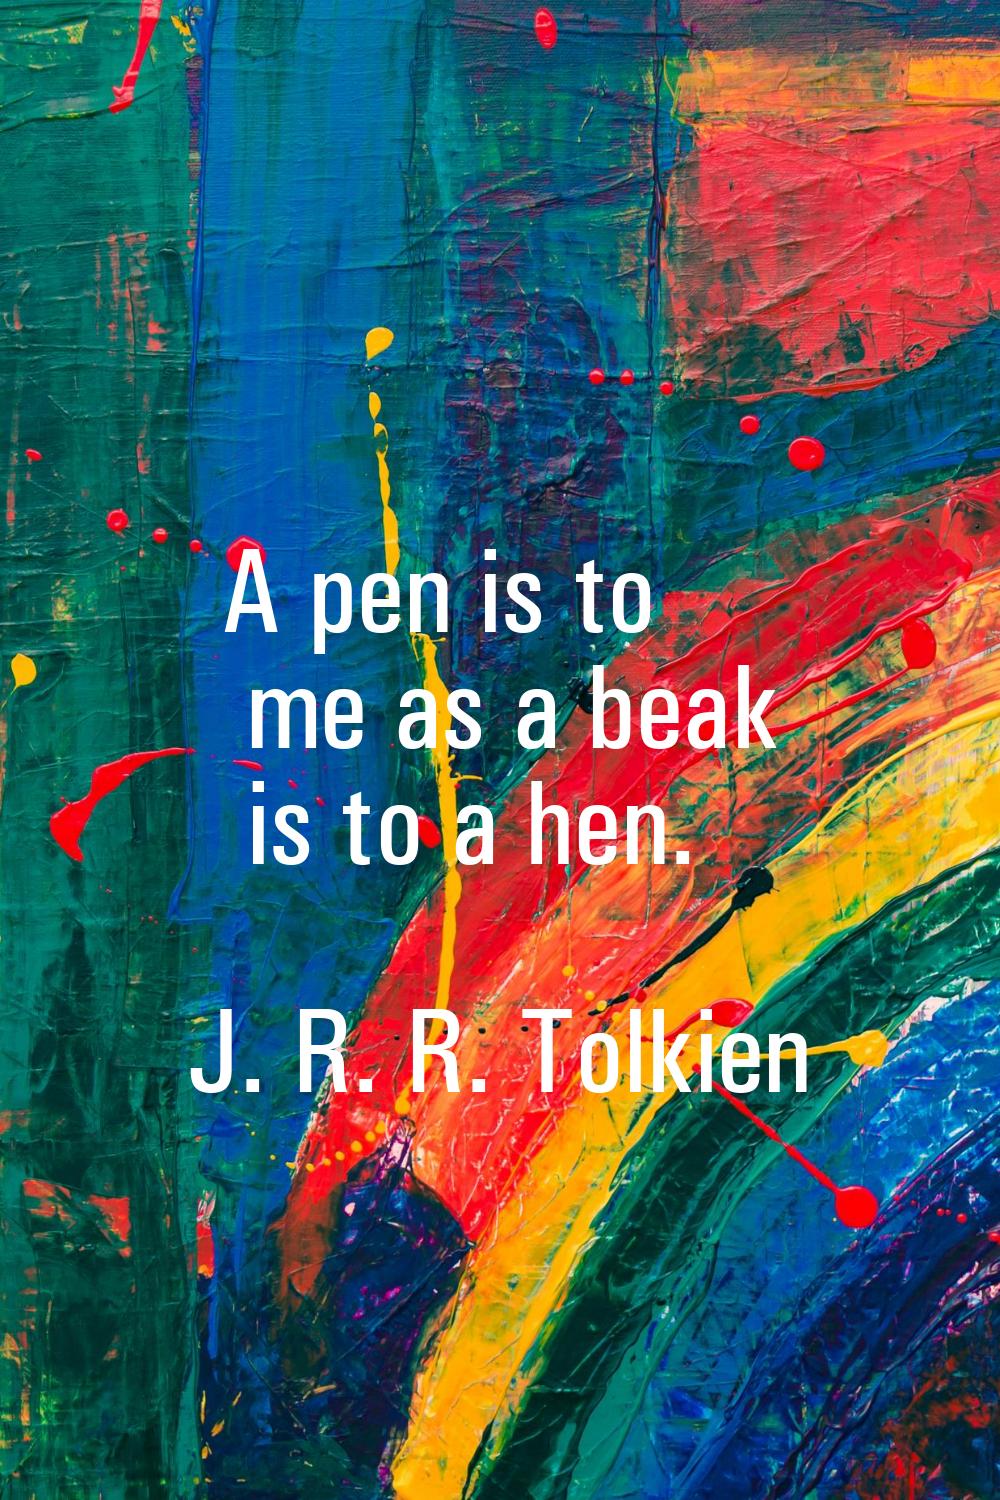 A pen is to me as a beak is to a hen.